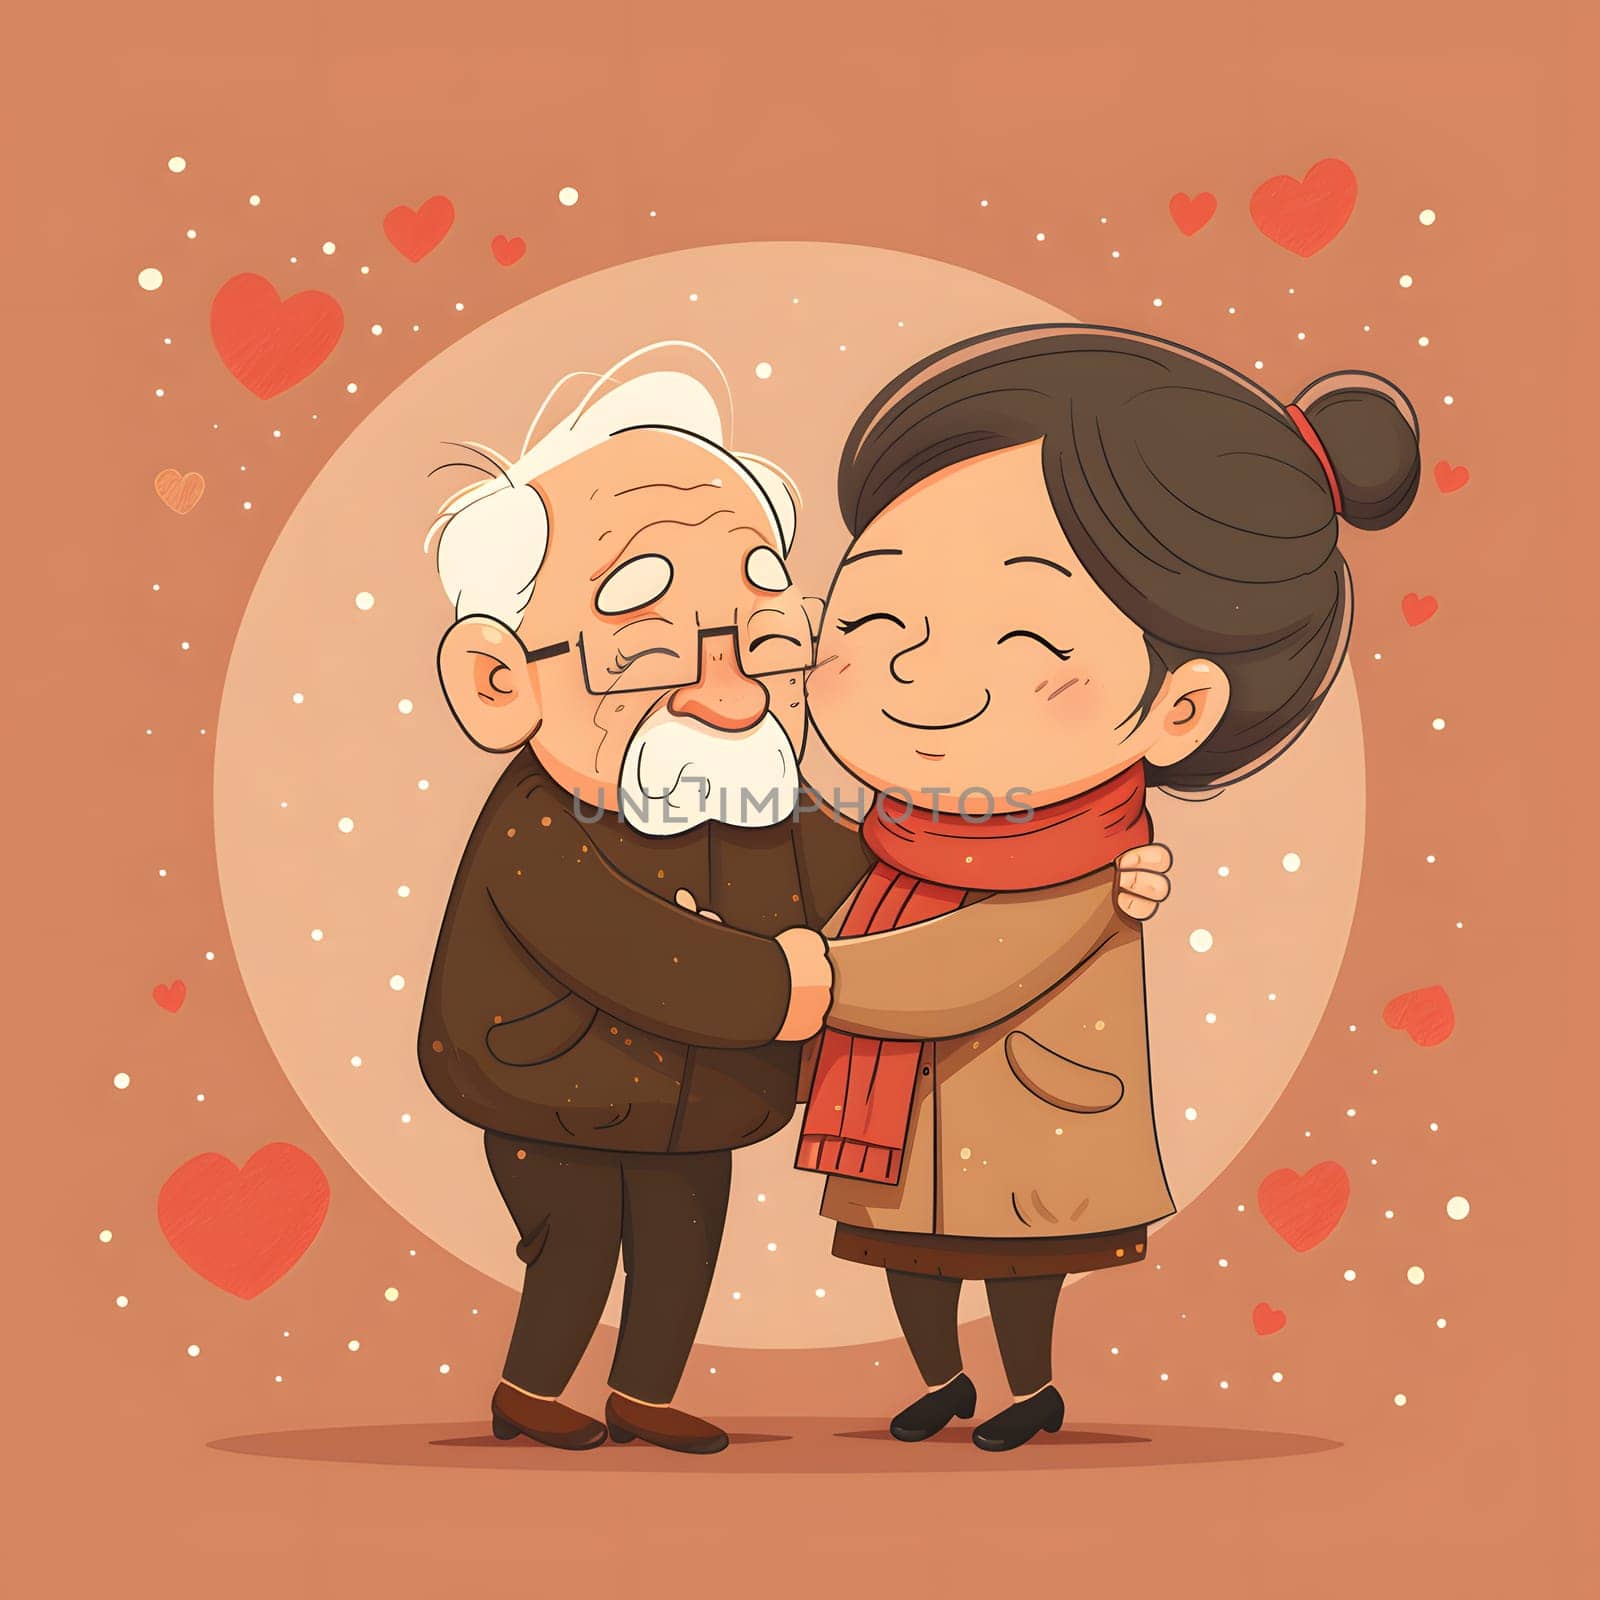 A happy cartoon illustration of an elderly man and a young girl embracing by Nadtochiy